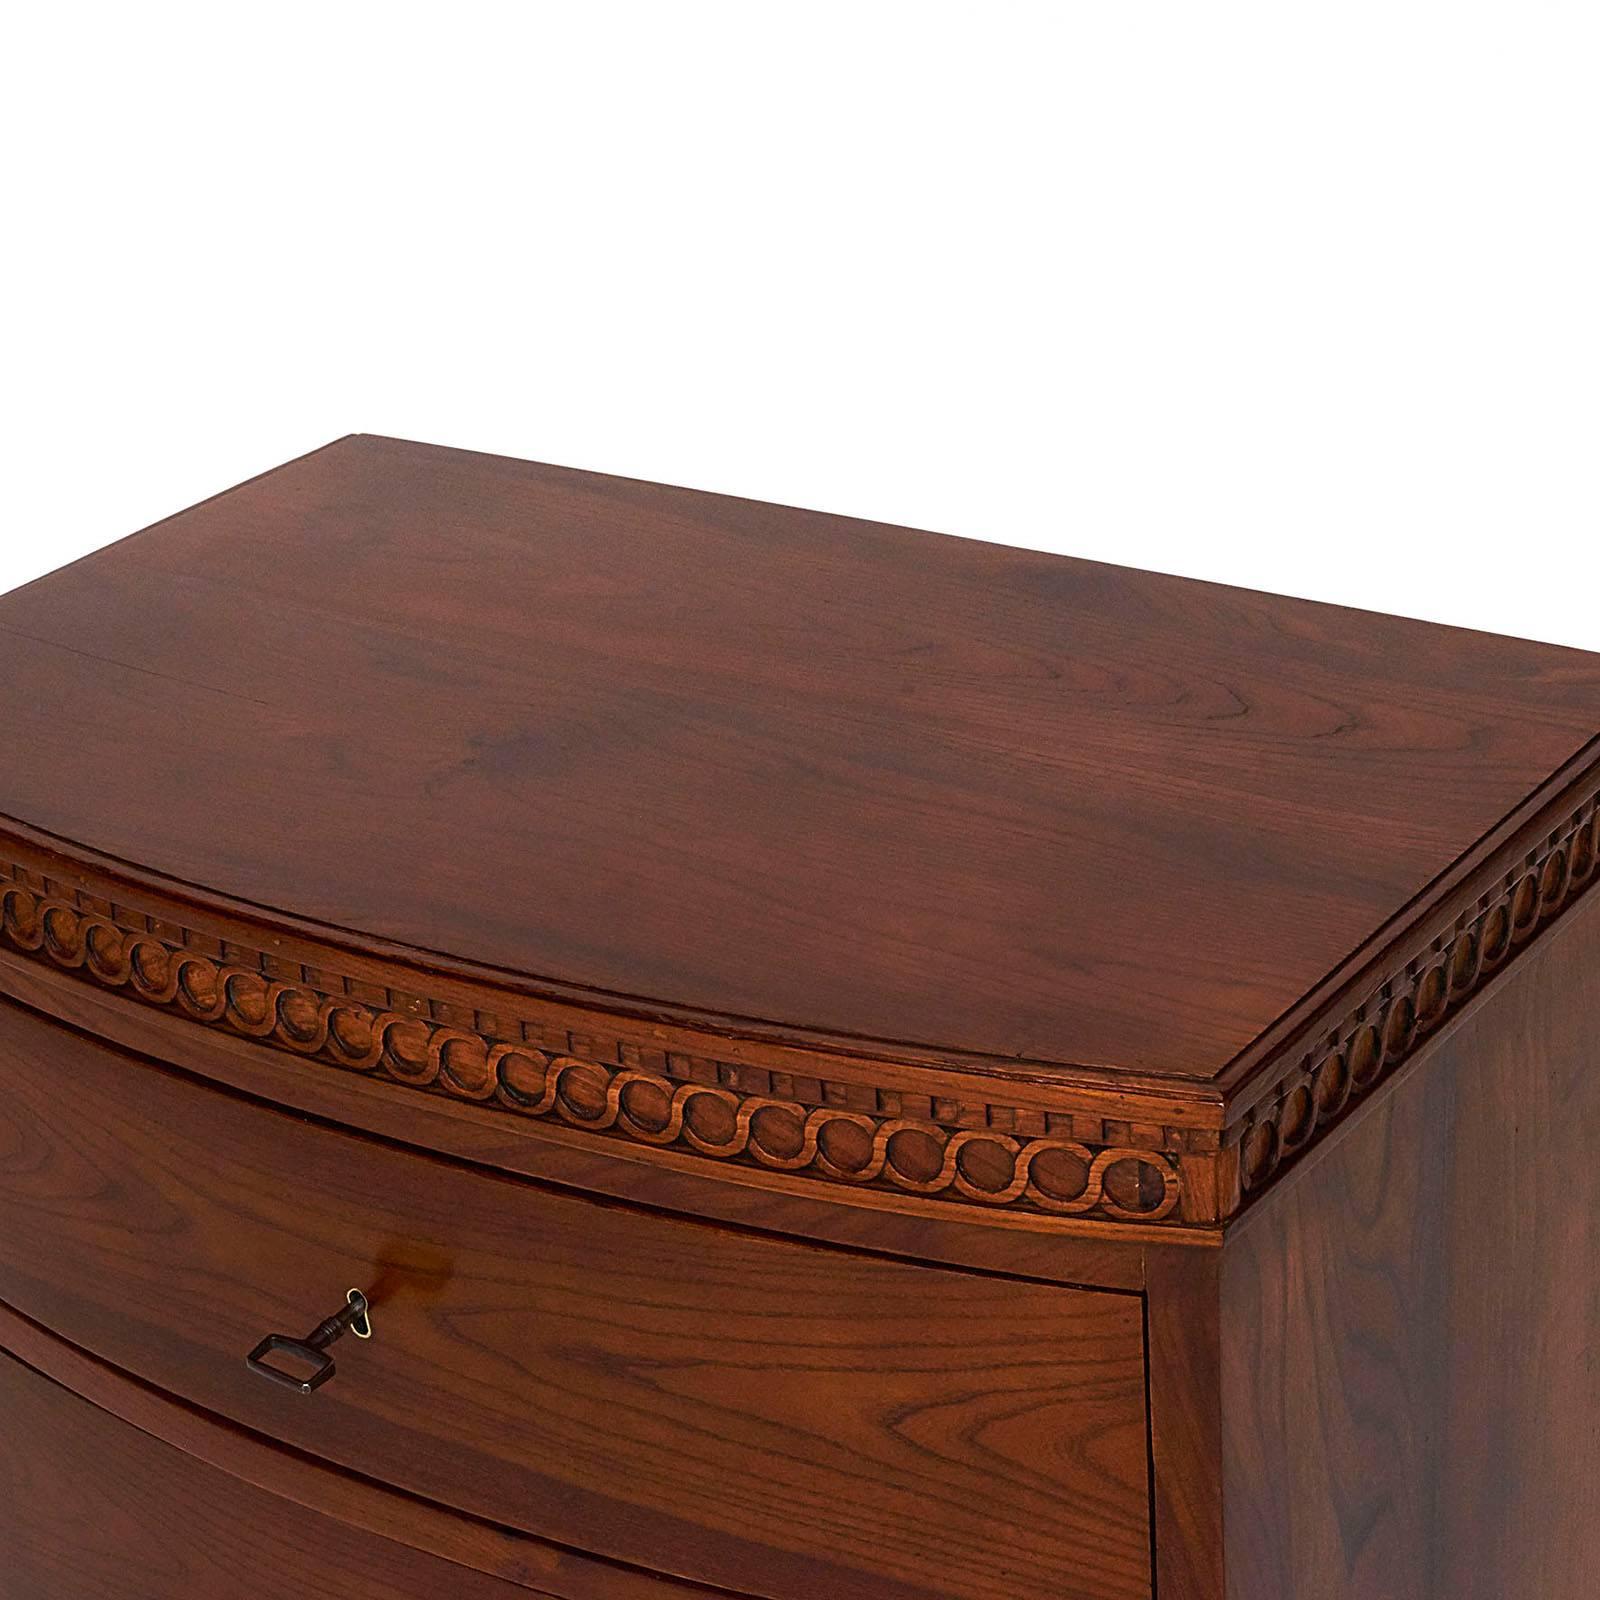 A Danish Louis XVI mahogany bow-front commode, circa 1790, the rectangular top with a bow front above a carved dentil and guilloché frieze, three long conforming drawers raised on bracket feet.